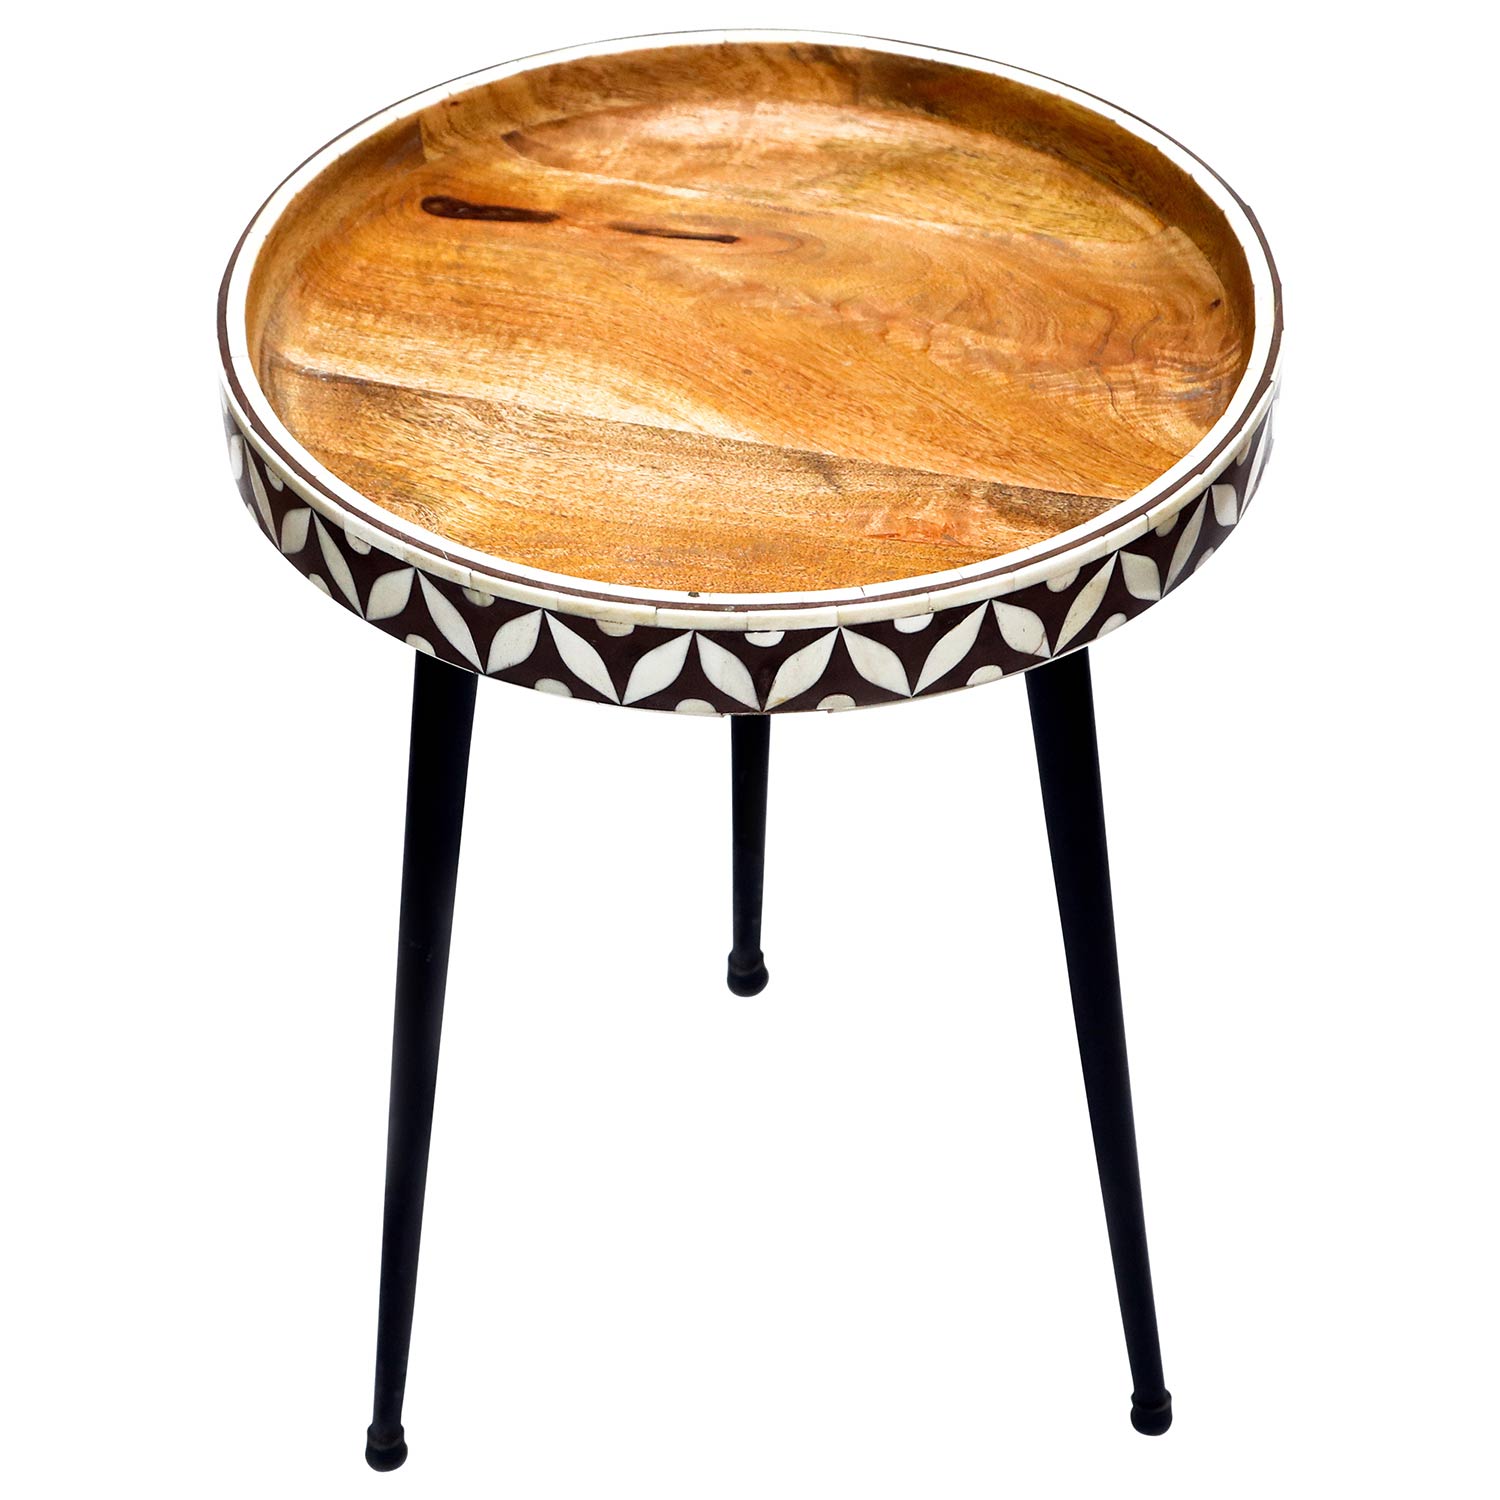 Ren-Wil Derby Accent table - Natural Wood/Black Metal RW ...